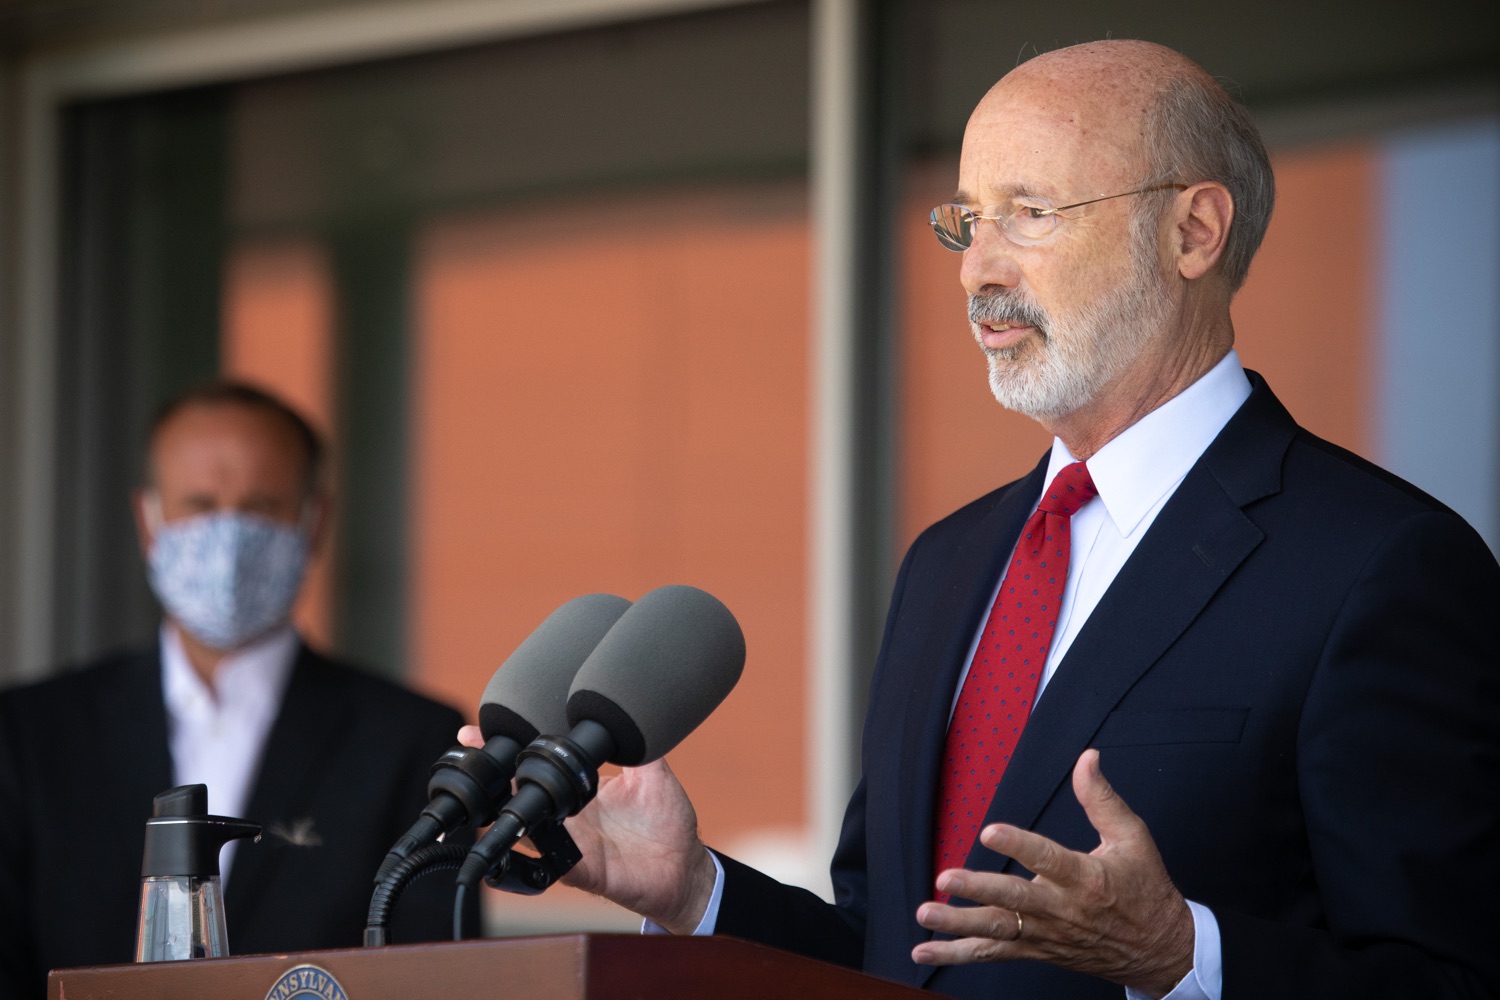 Pennsylvania Governor Tom Wolf speaking with the press.  Governor Tom Wolf visited the child care center at PSECU headquarters in Harrisburg today to announce $53 million in additional financial support for child care providers that have suffered during COVID-19.  Harrisburg, PA  July 6, 2020..<br><a href="https://filesource.amperwave.net/commonwealthofpa/photo/18143_gov_cares_dz_10.jpg" target="_blank">⇣ Download Photo</a>